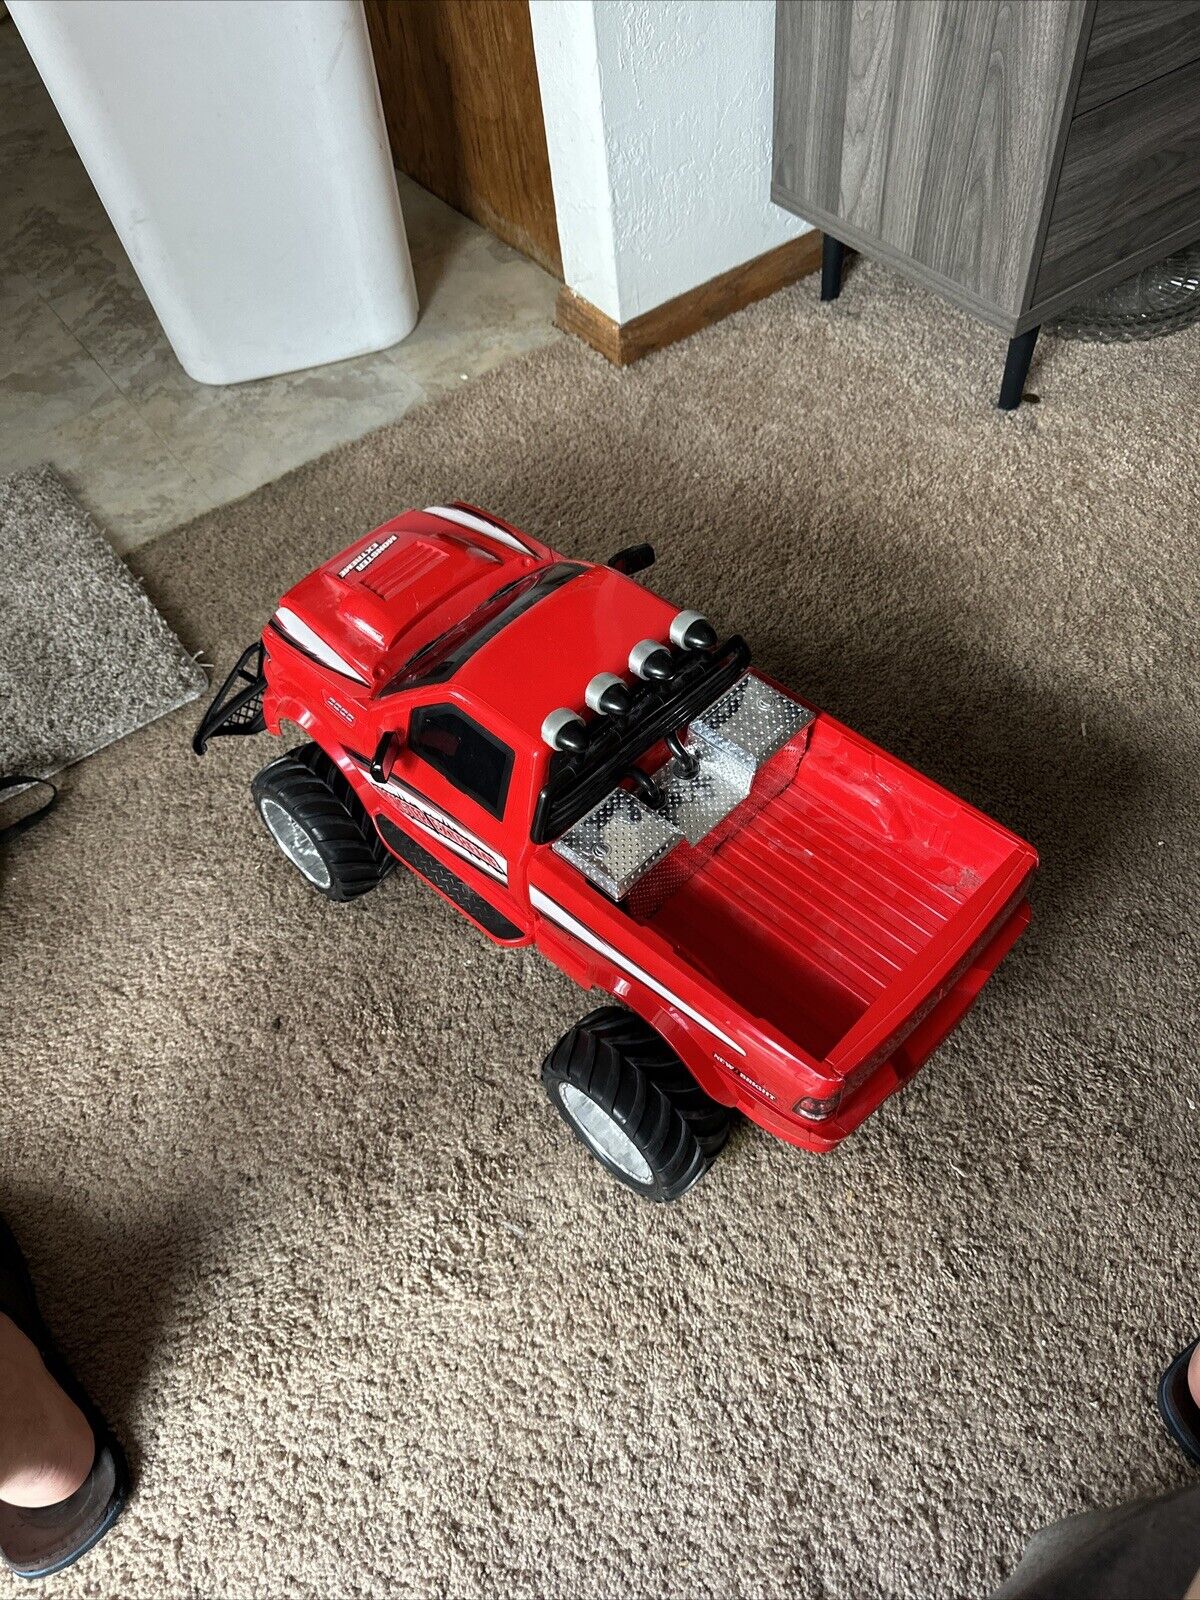 New Bright Dodge Ram Monster Extreme Red RC truck Read Description